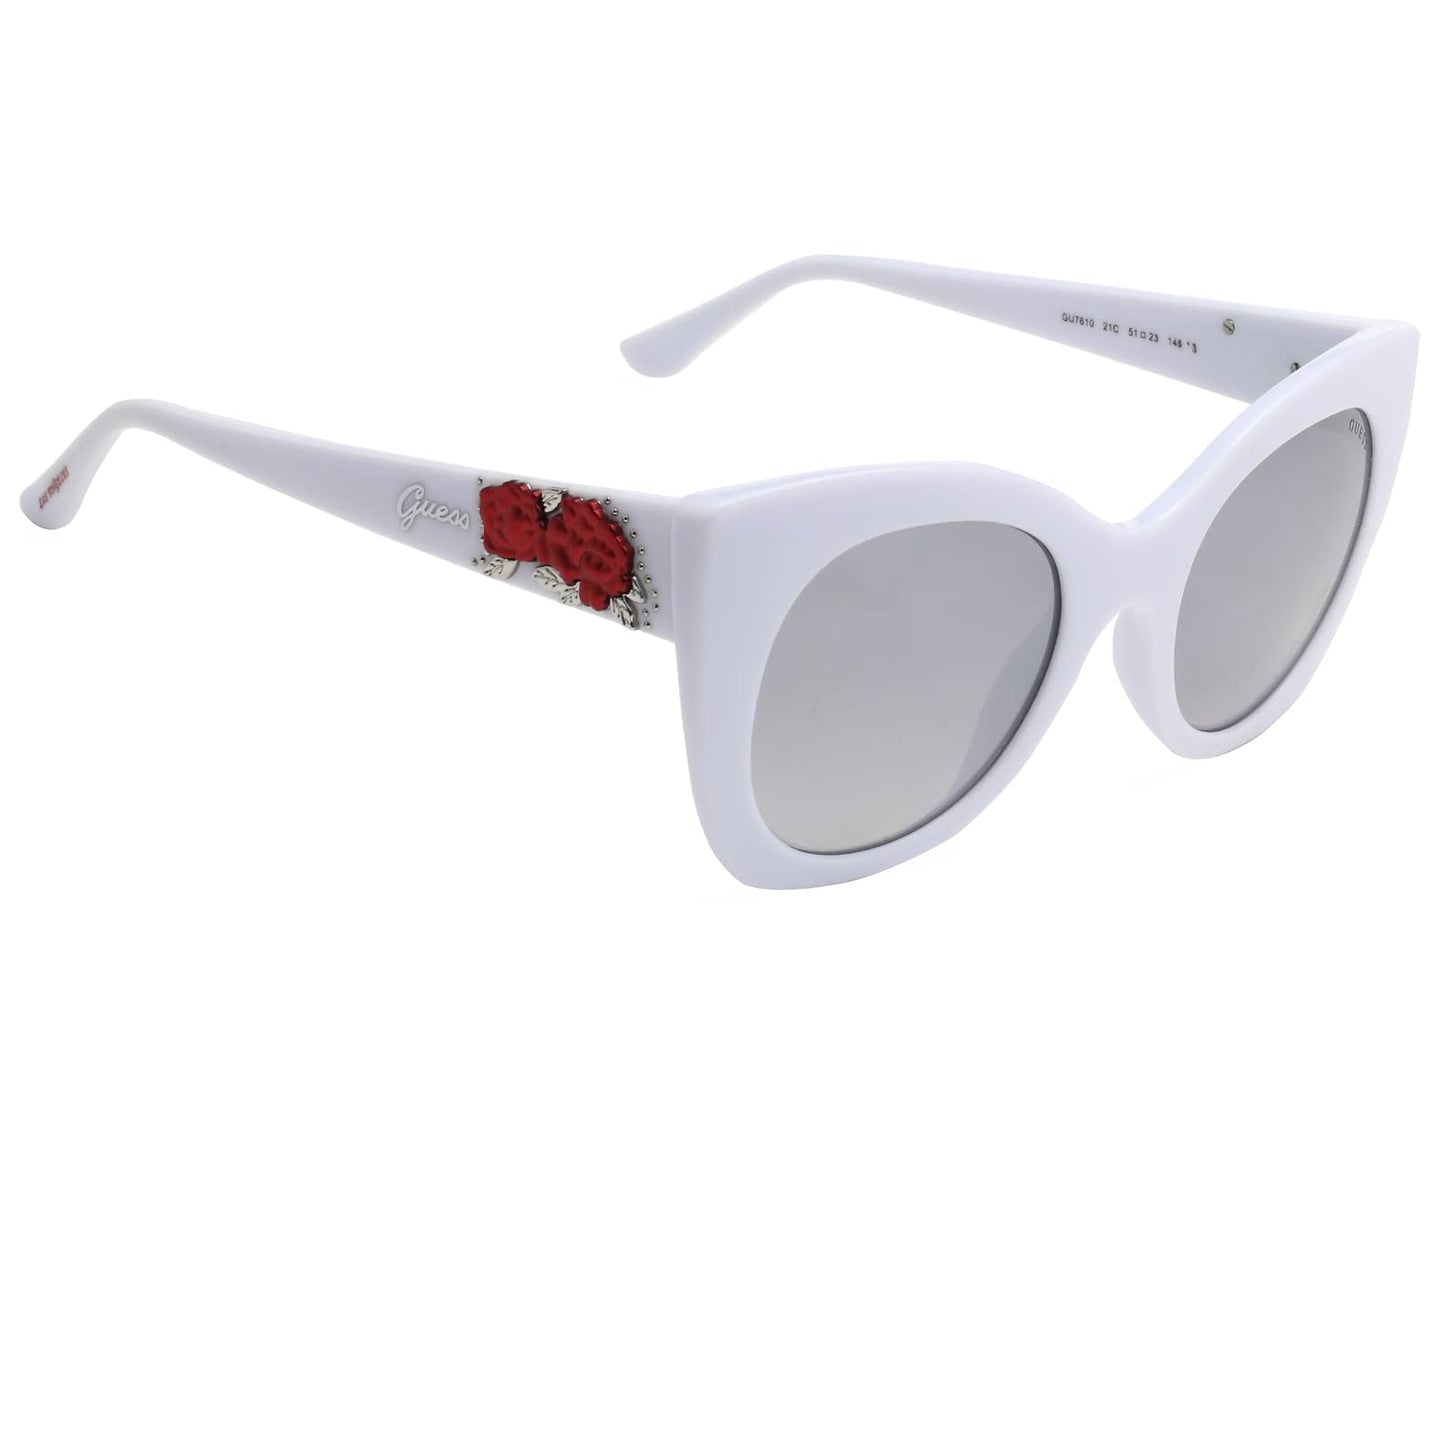 Guess Mirrored Butterfly Women Sunglasses - (GU7610 21C 51 S |51| Grey Color Lens)